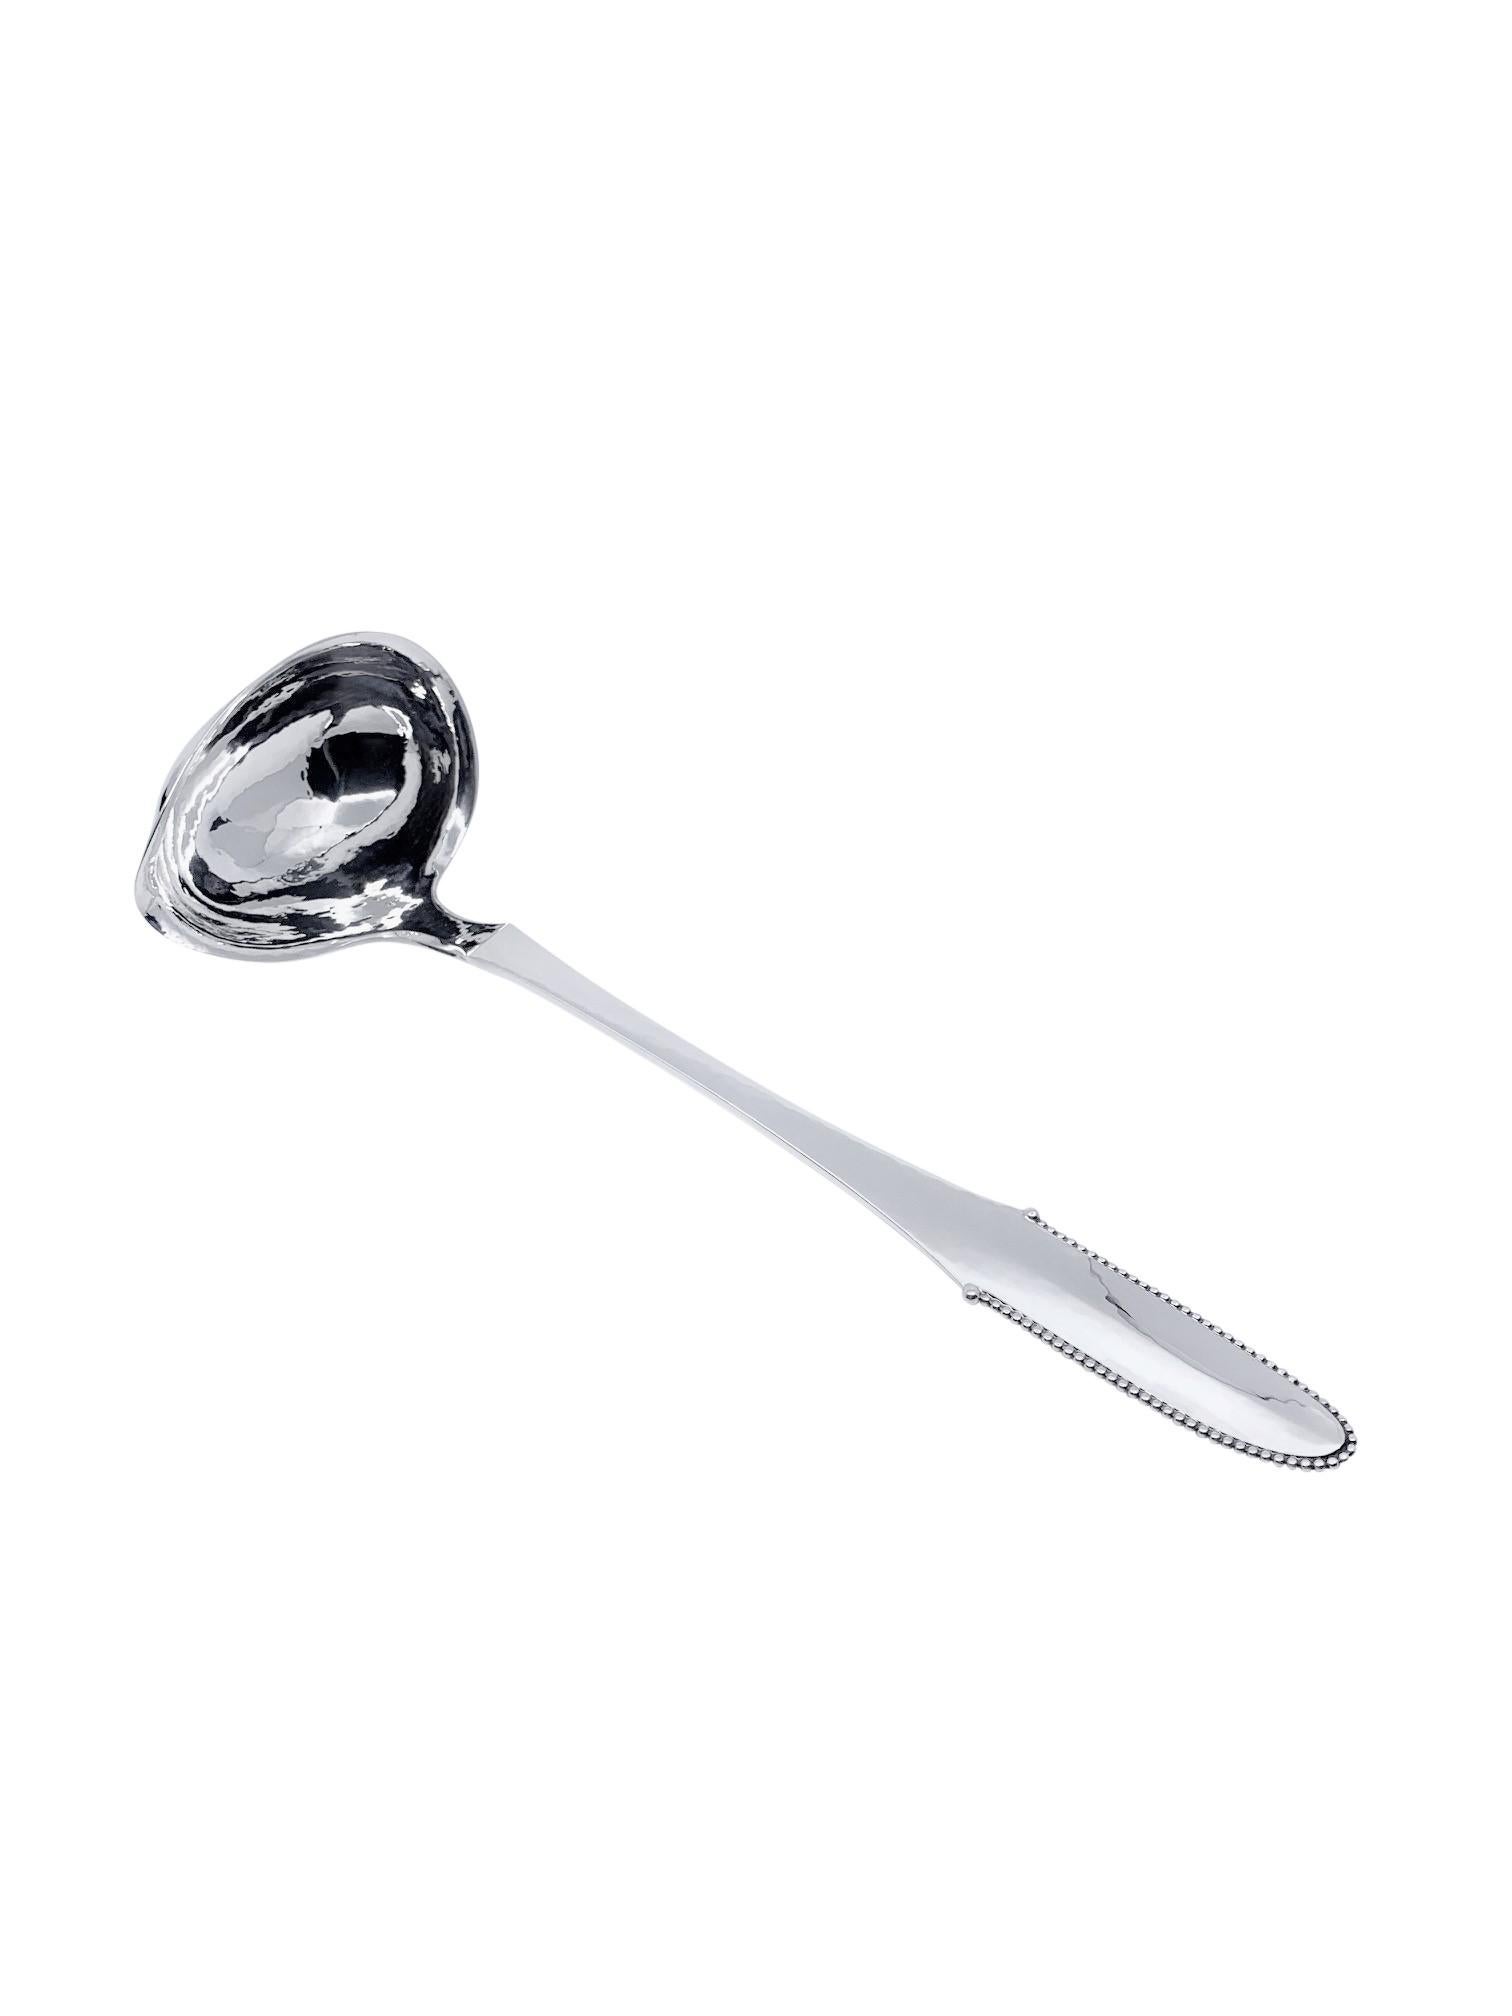 European Antique Georg Jensen Sterling Silver Large Beaded Punch/Soup Ladle 151 For Sale